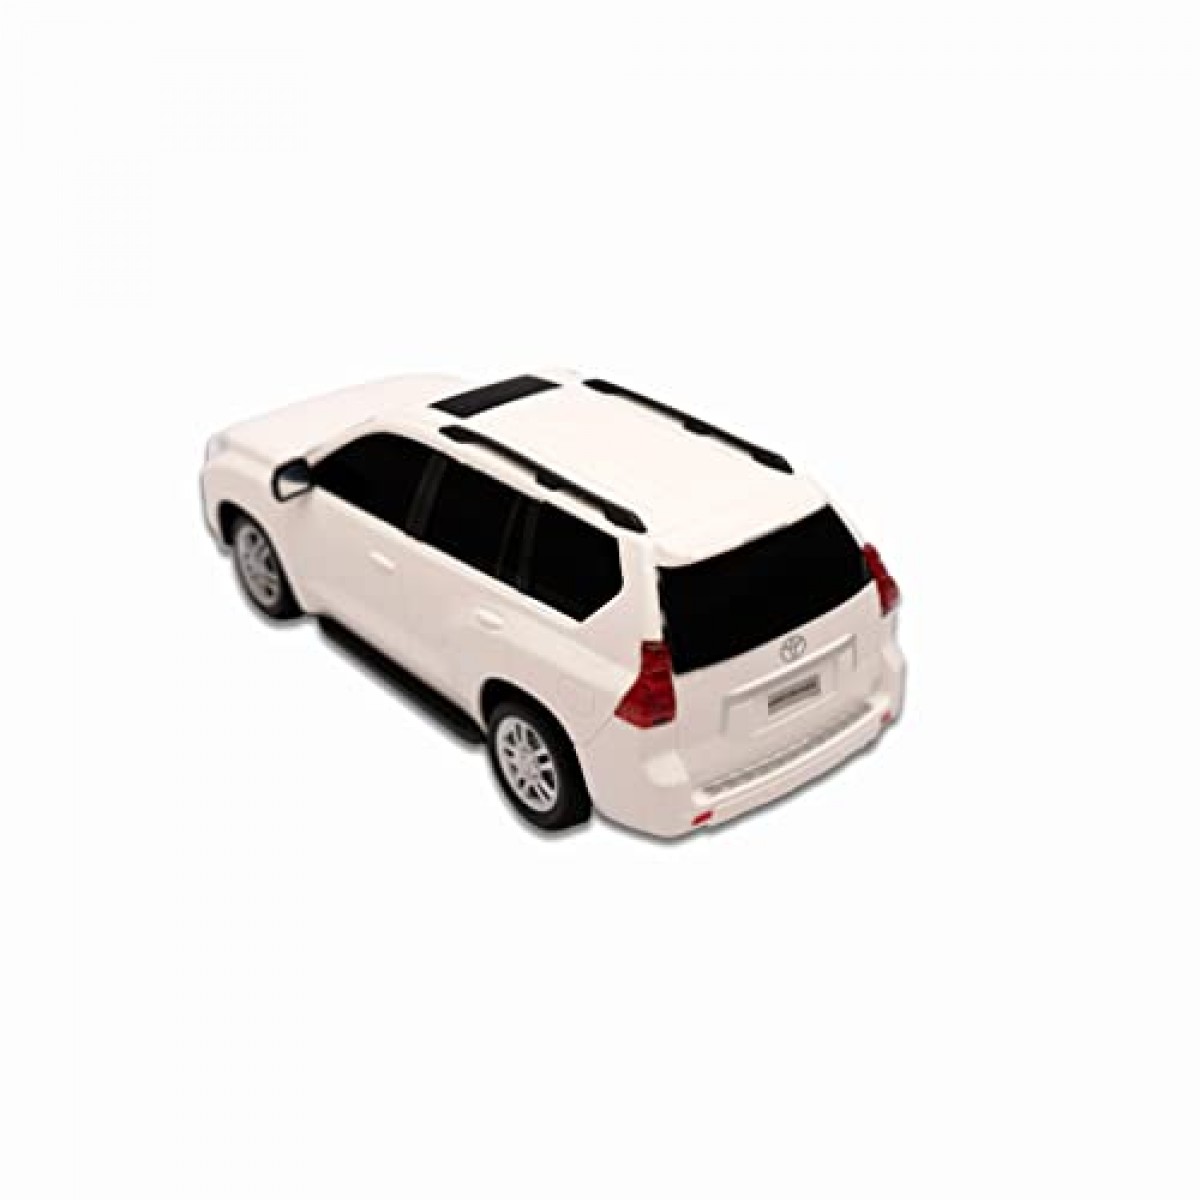 Road Burner Rechargable Remote Control Car for Kids Toyata Prado Full Function, 1:24 Scale Pack of 1, White, Age 6Y+